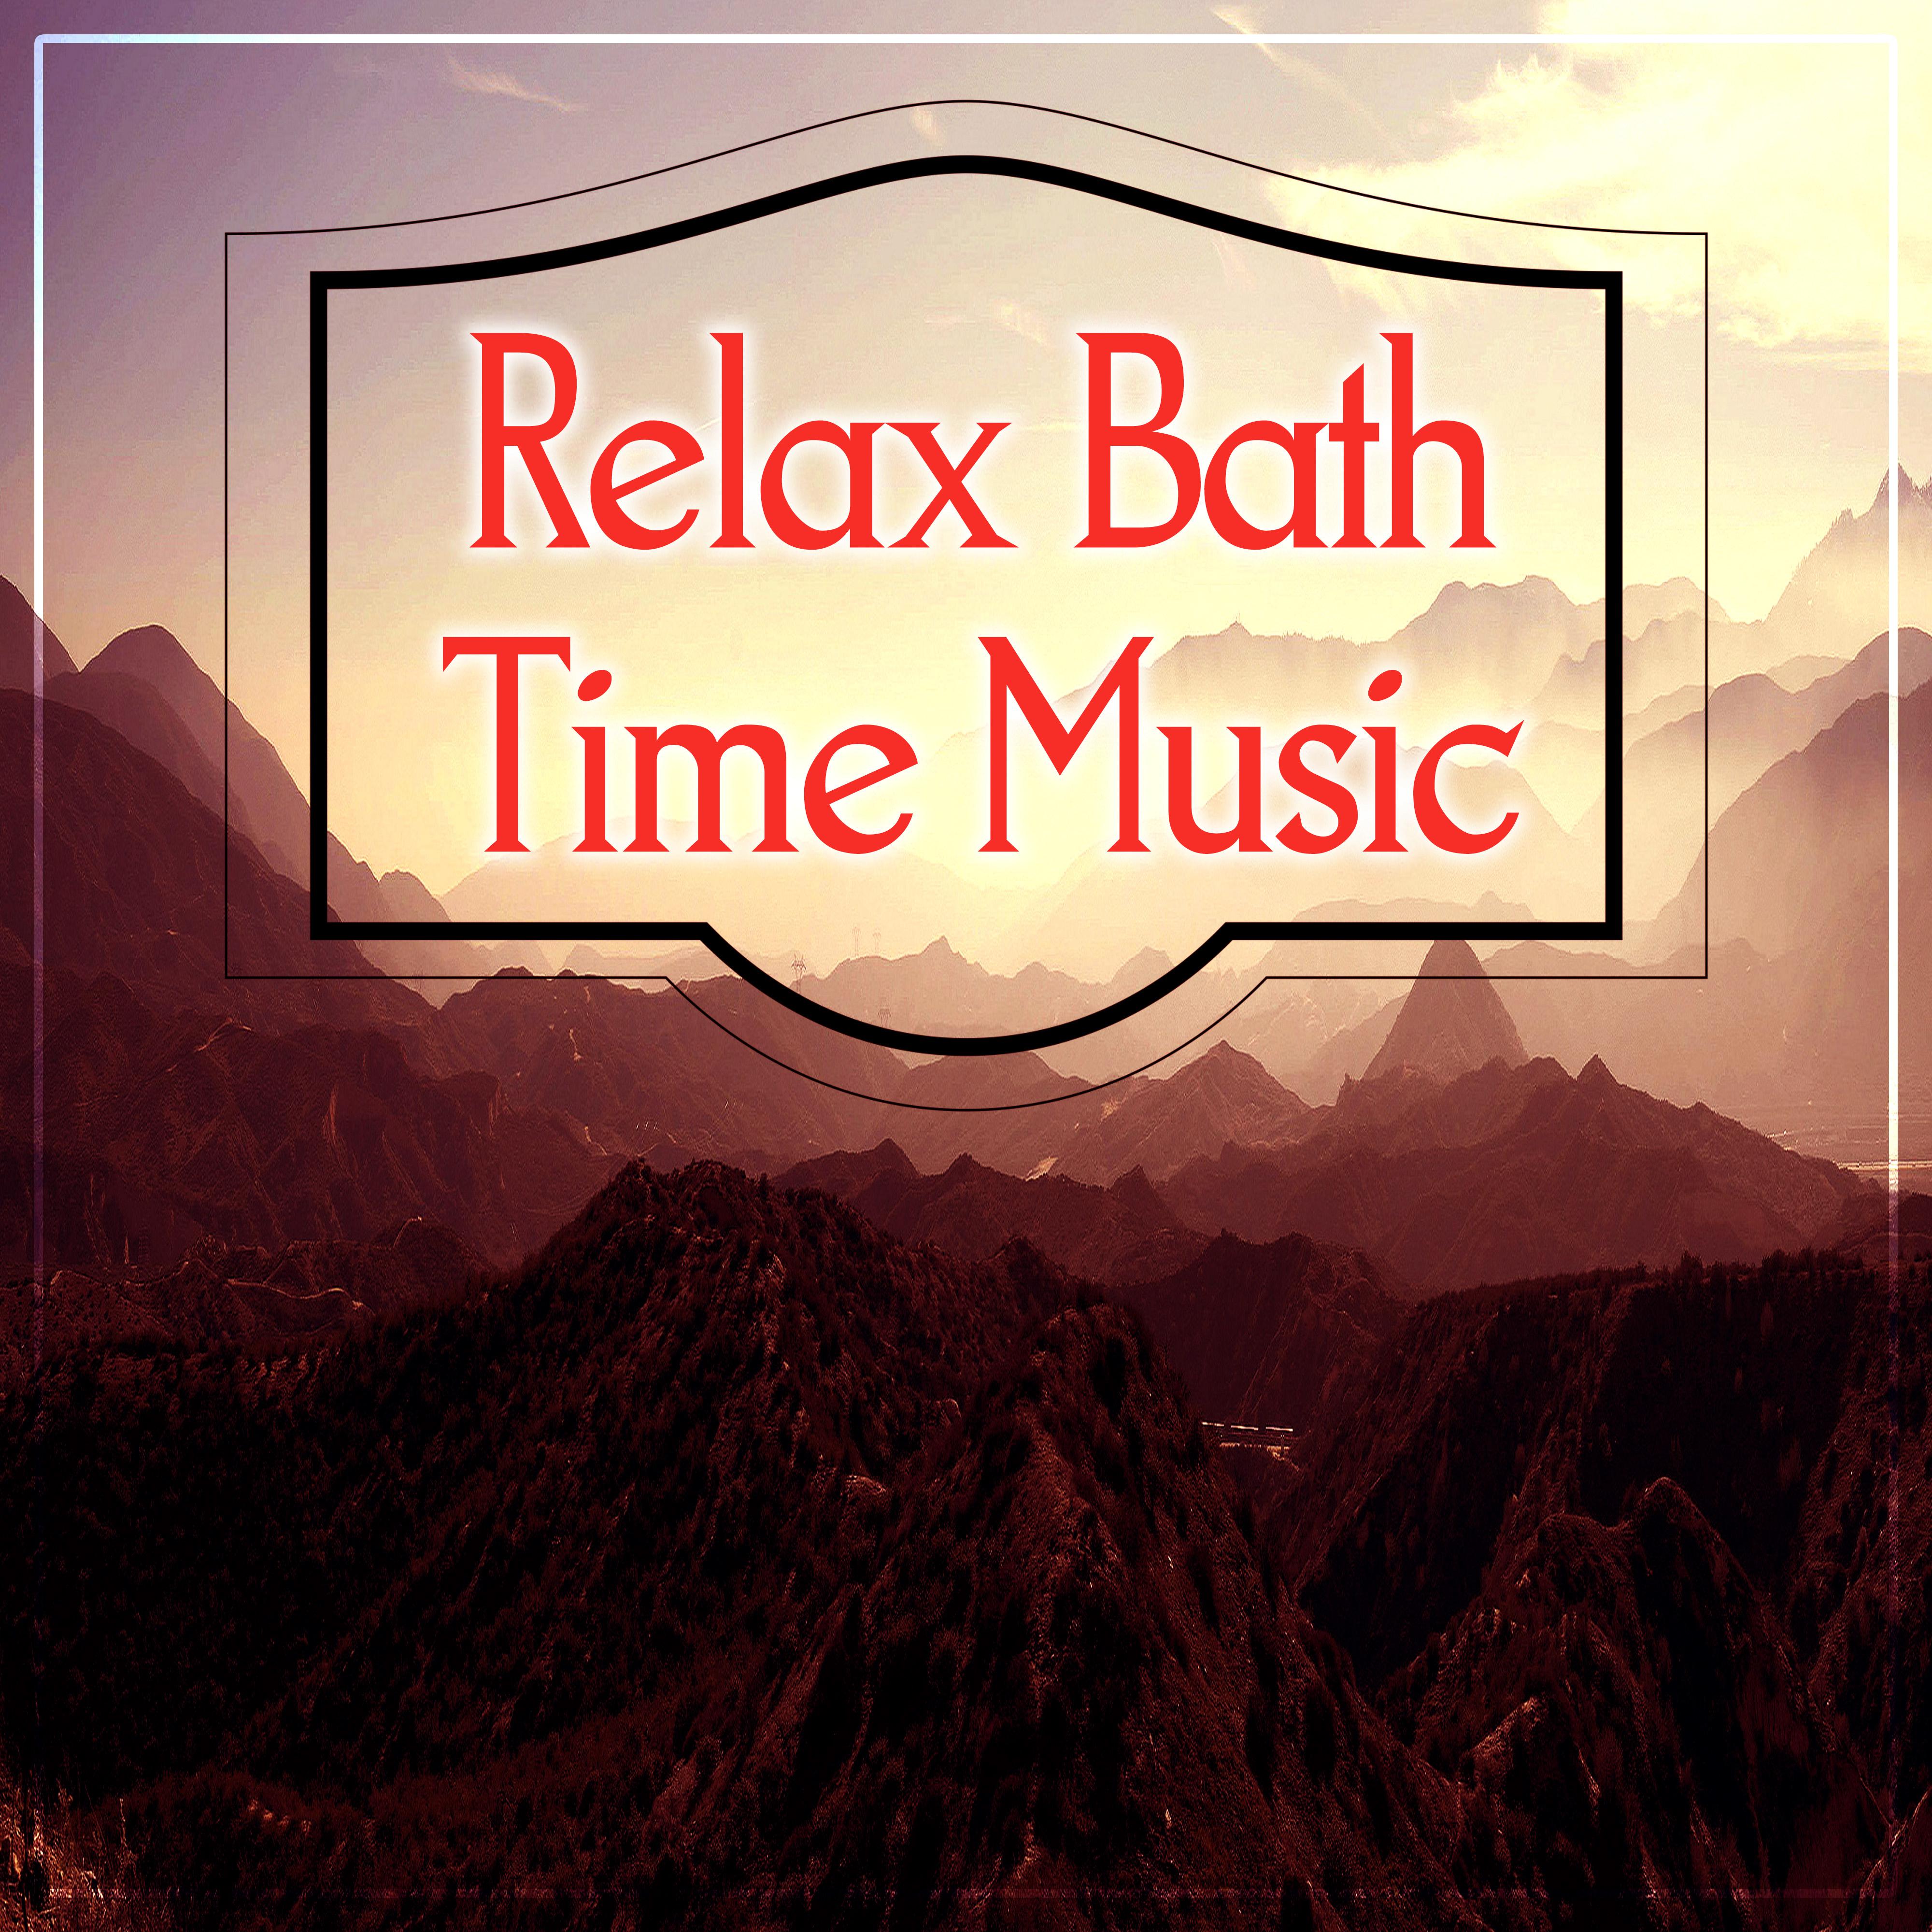 Relax Bath Time Music - Gentle Music for Relax Time in Bathroom, Sensuality Sounds to SPA & Beauty,  Wellness